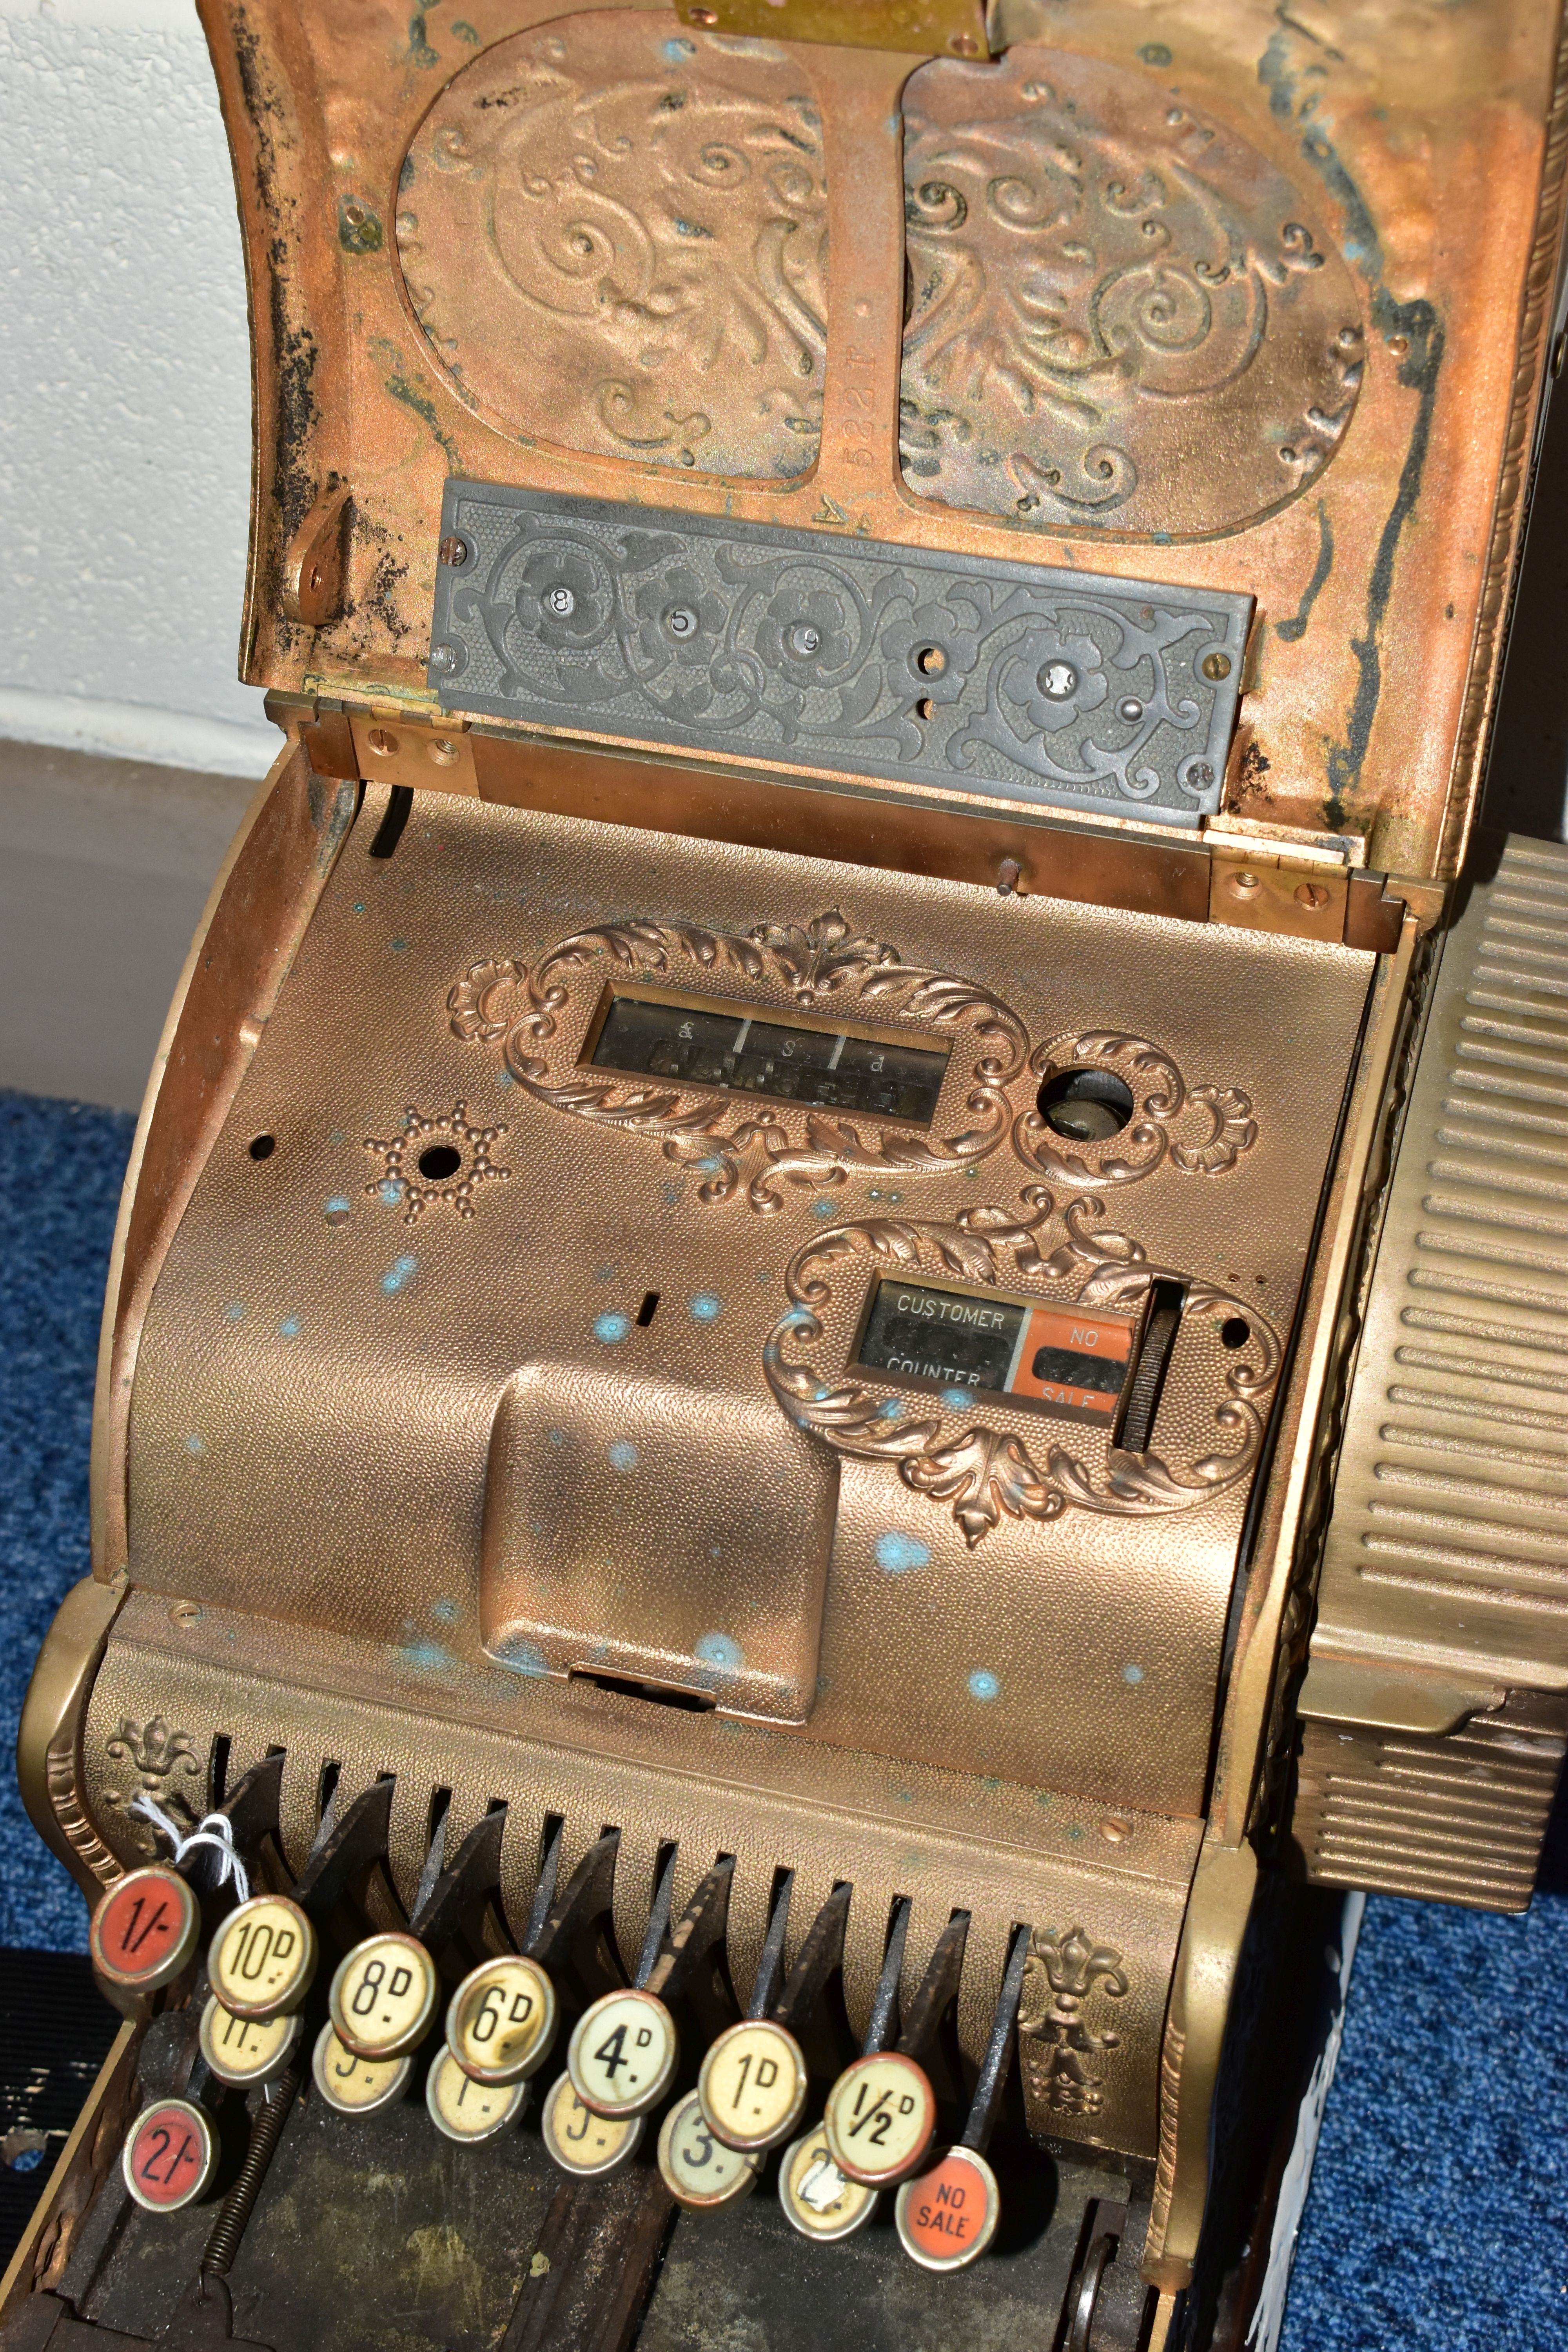 A 20TH CENTURY AMERICAN BRASS CASH REGISTER BY NATIONAL DAYTON OF OHIO, mounted on a wooden - Image 10 of 16